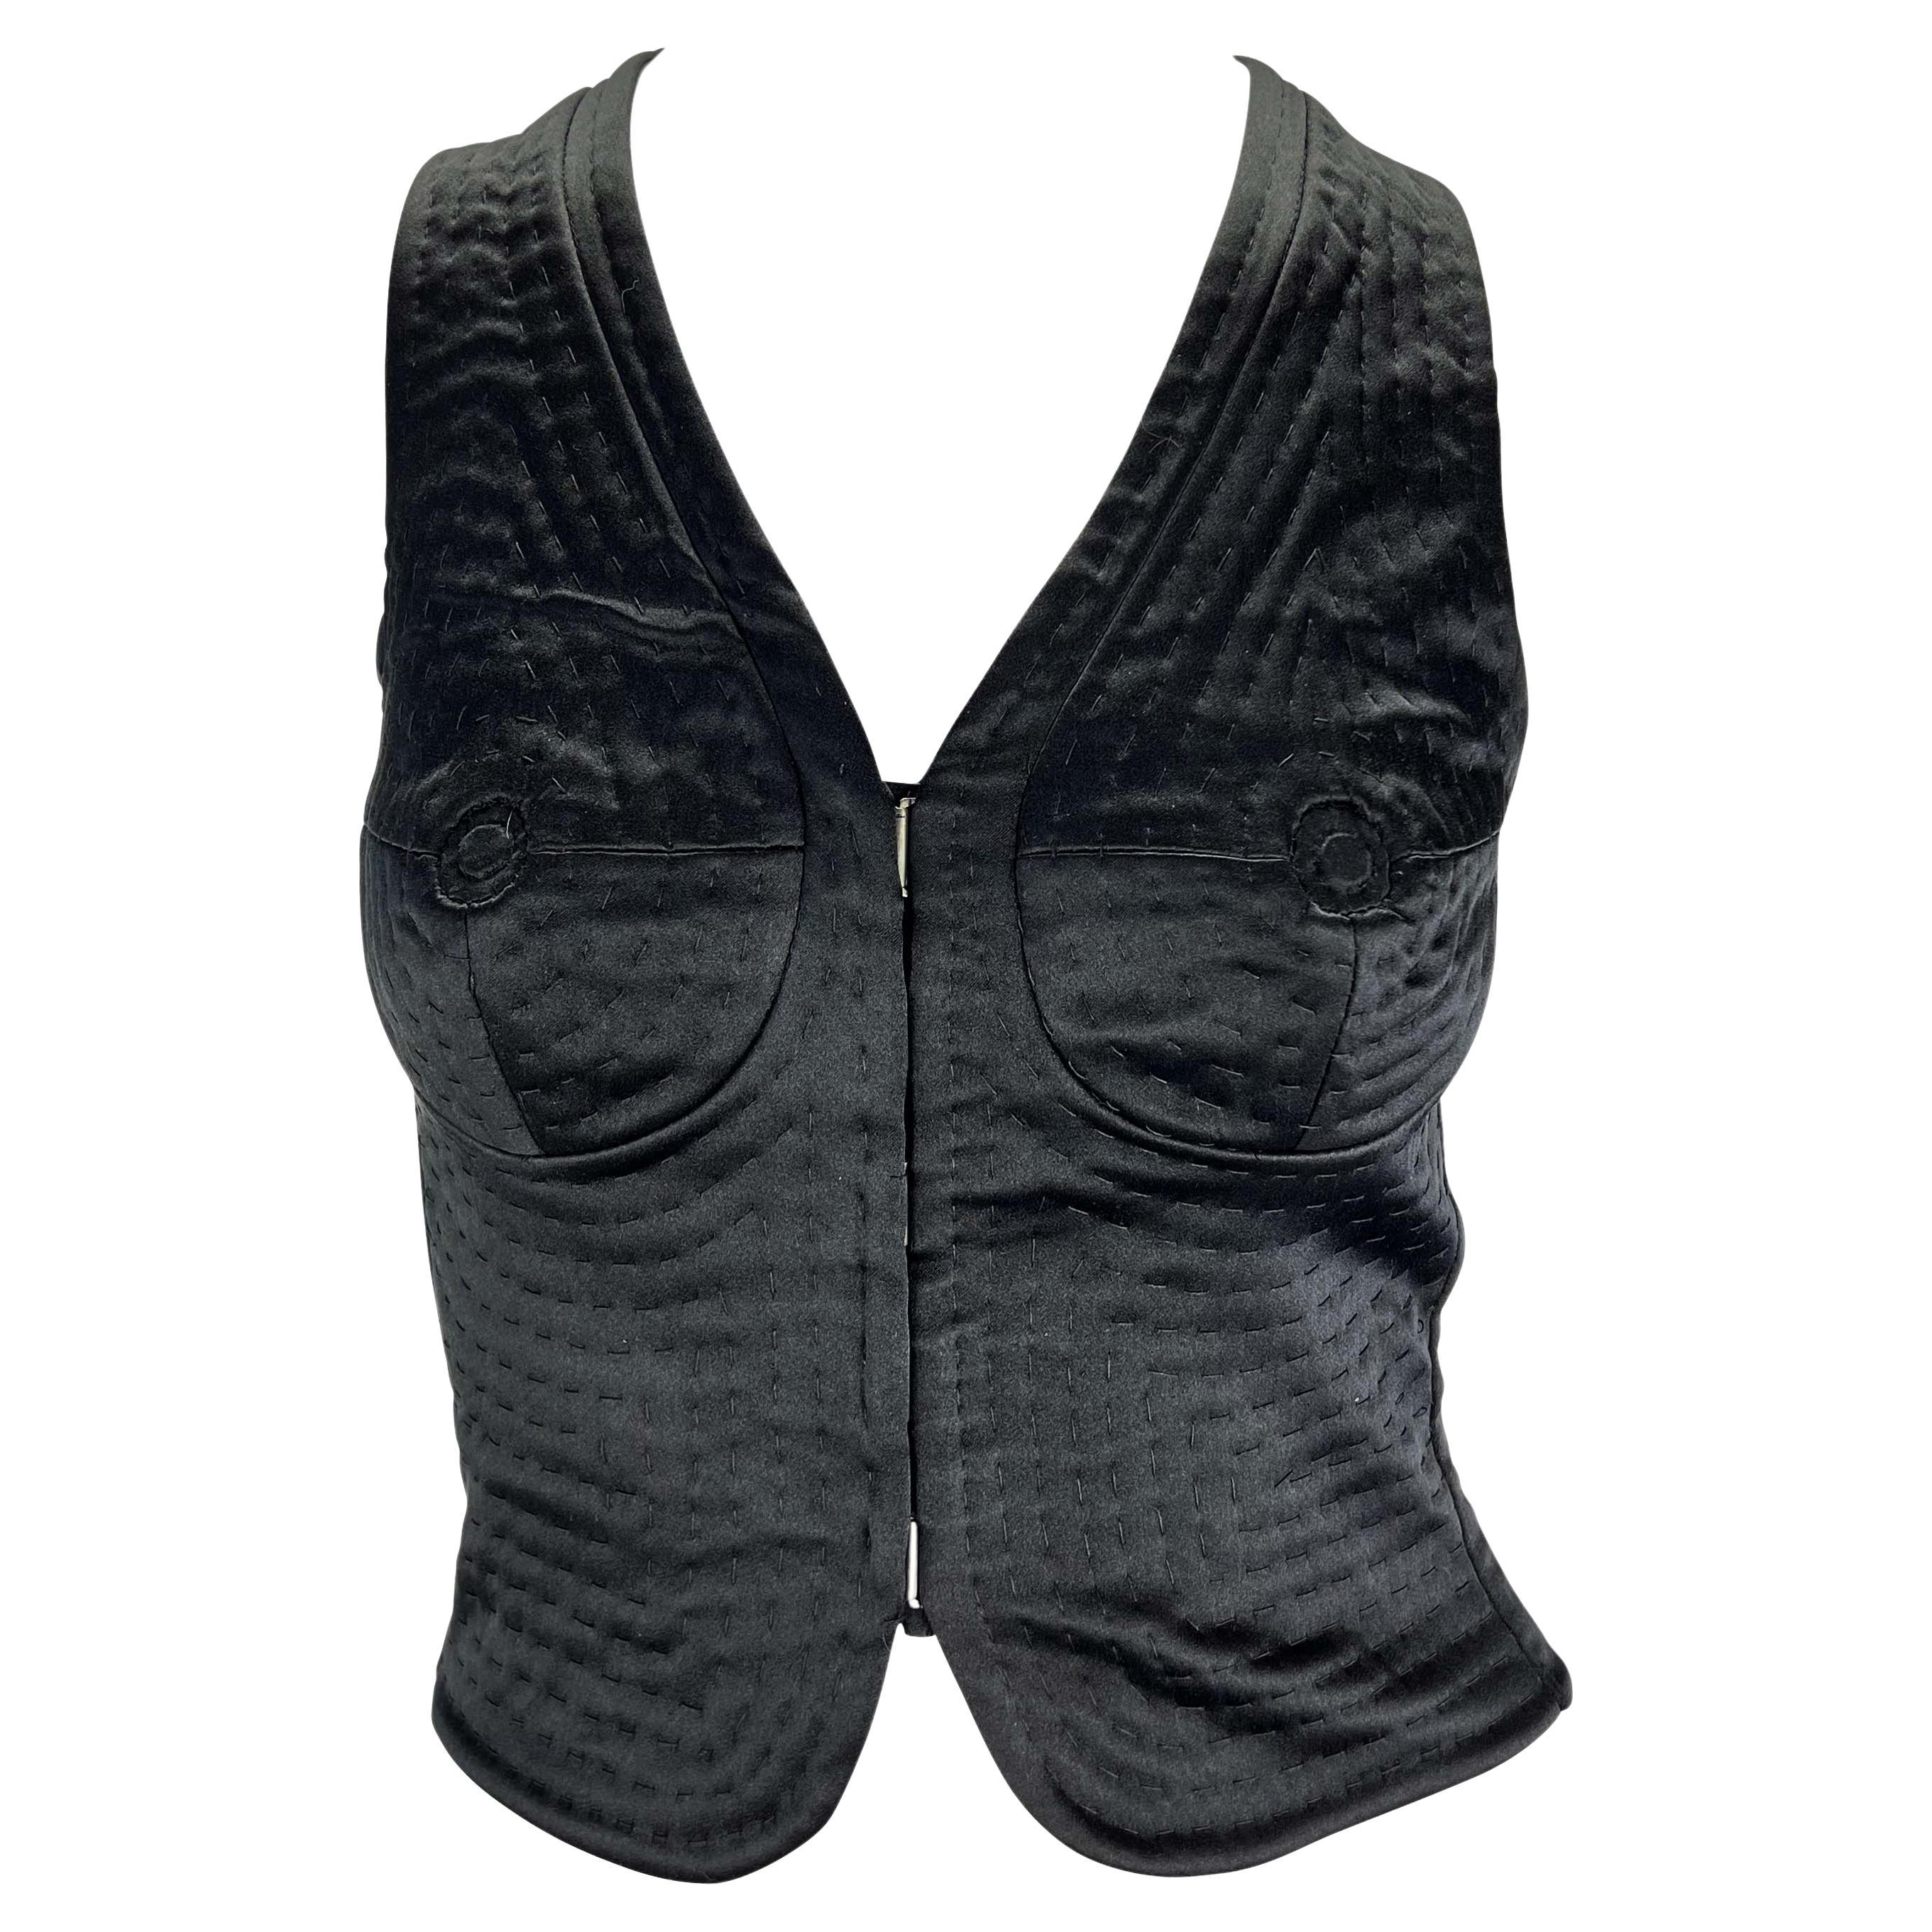 S/S 2003 Yves Saint Laurent by Tom Ford Runway Nude Illusion Satin Breast Vest 